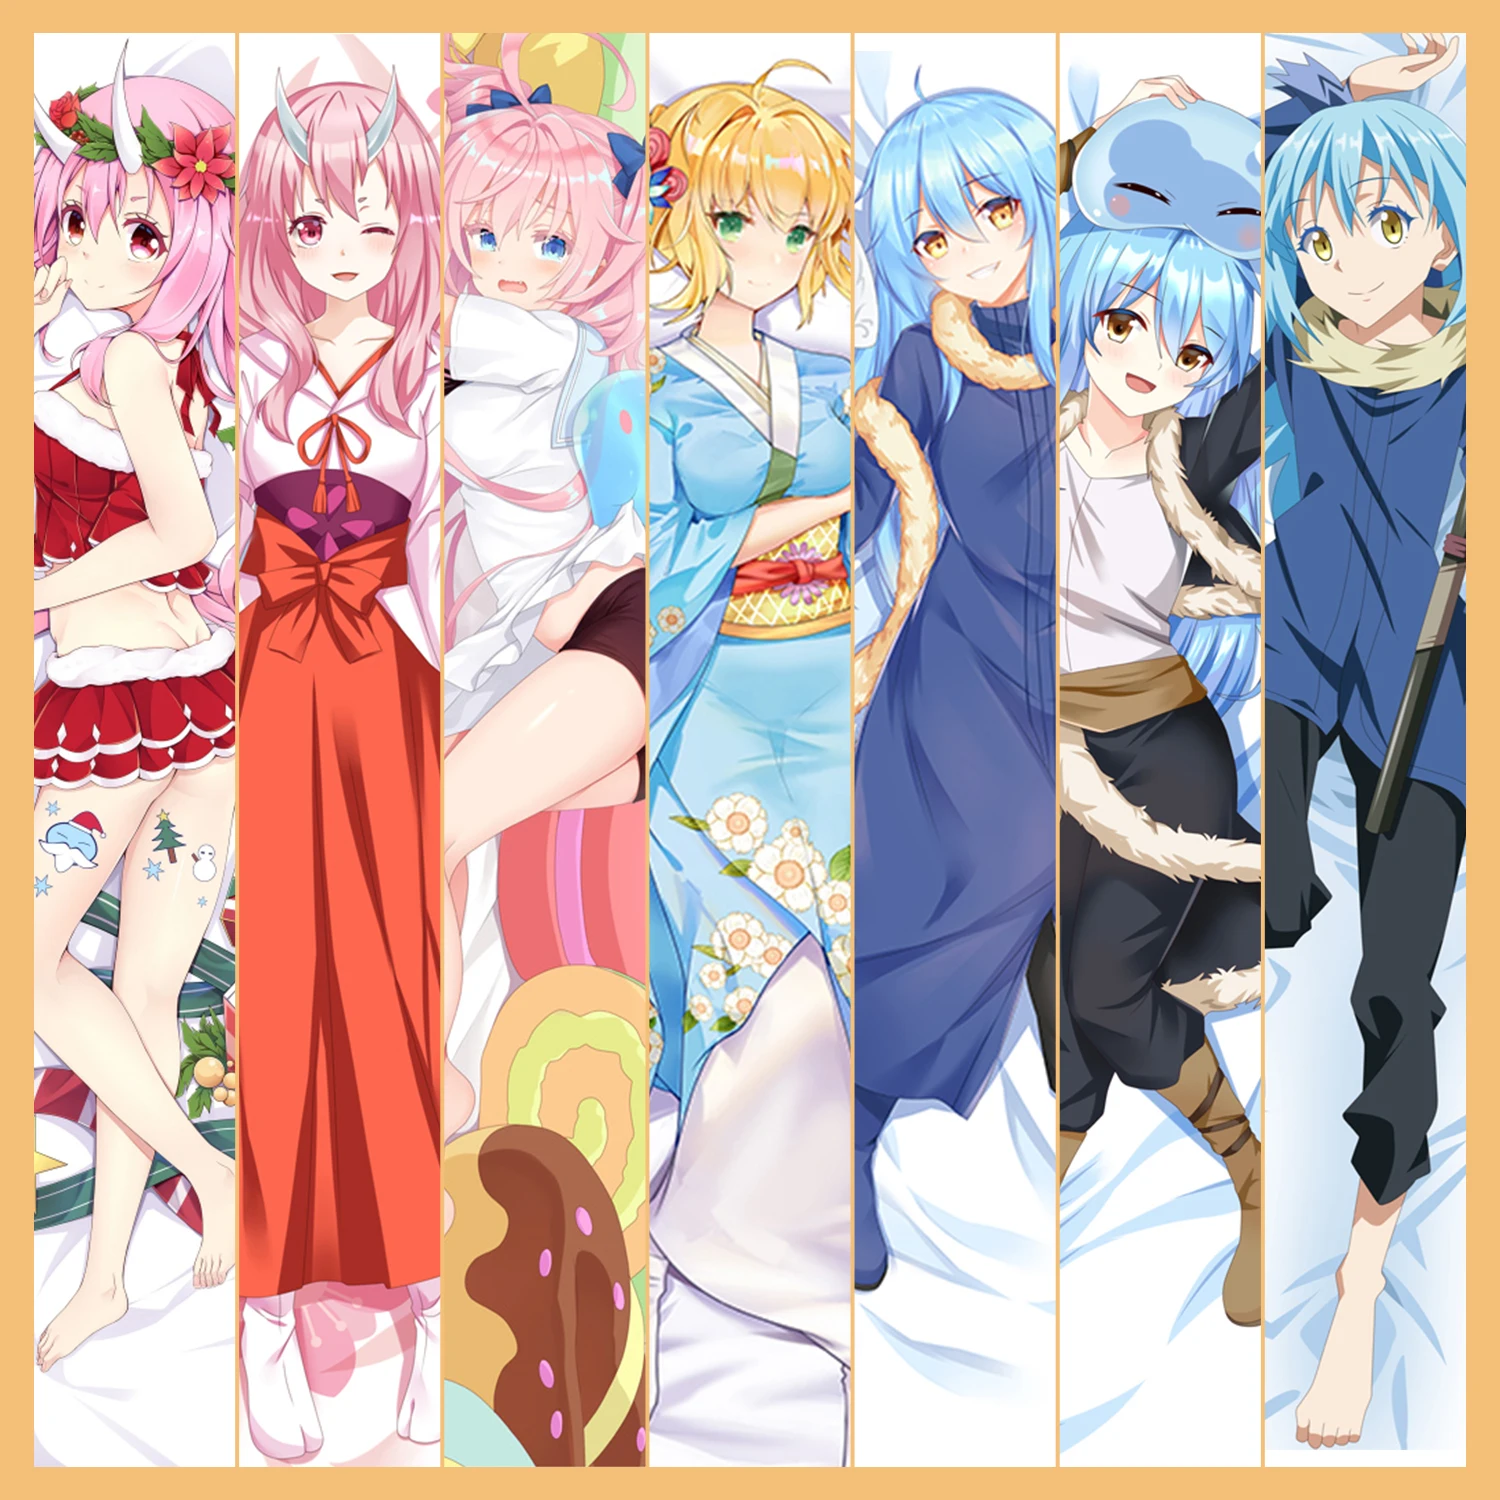 That Time I Got Reincarnated as a Slime  Anime Body Pillow Case Cover Multi-size 